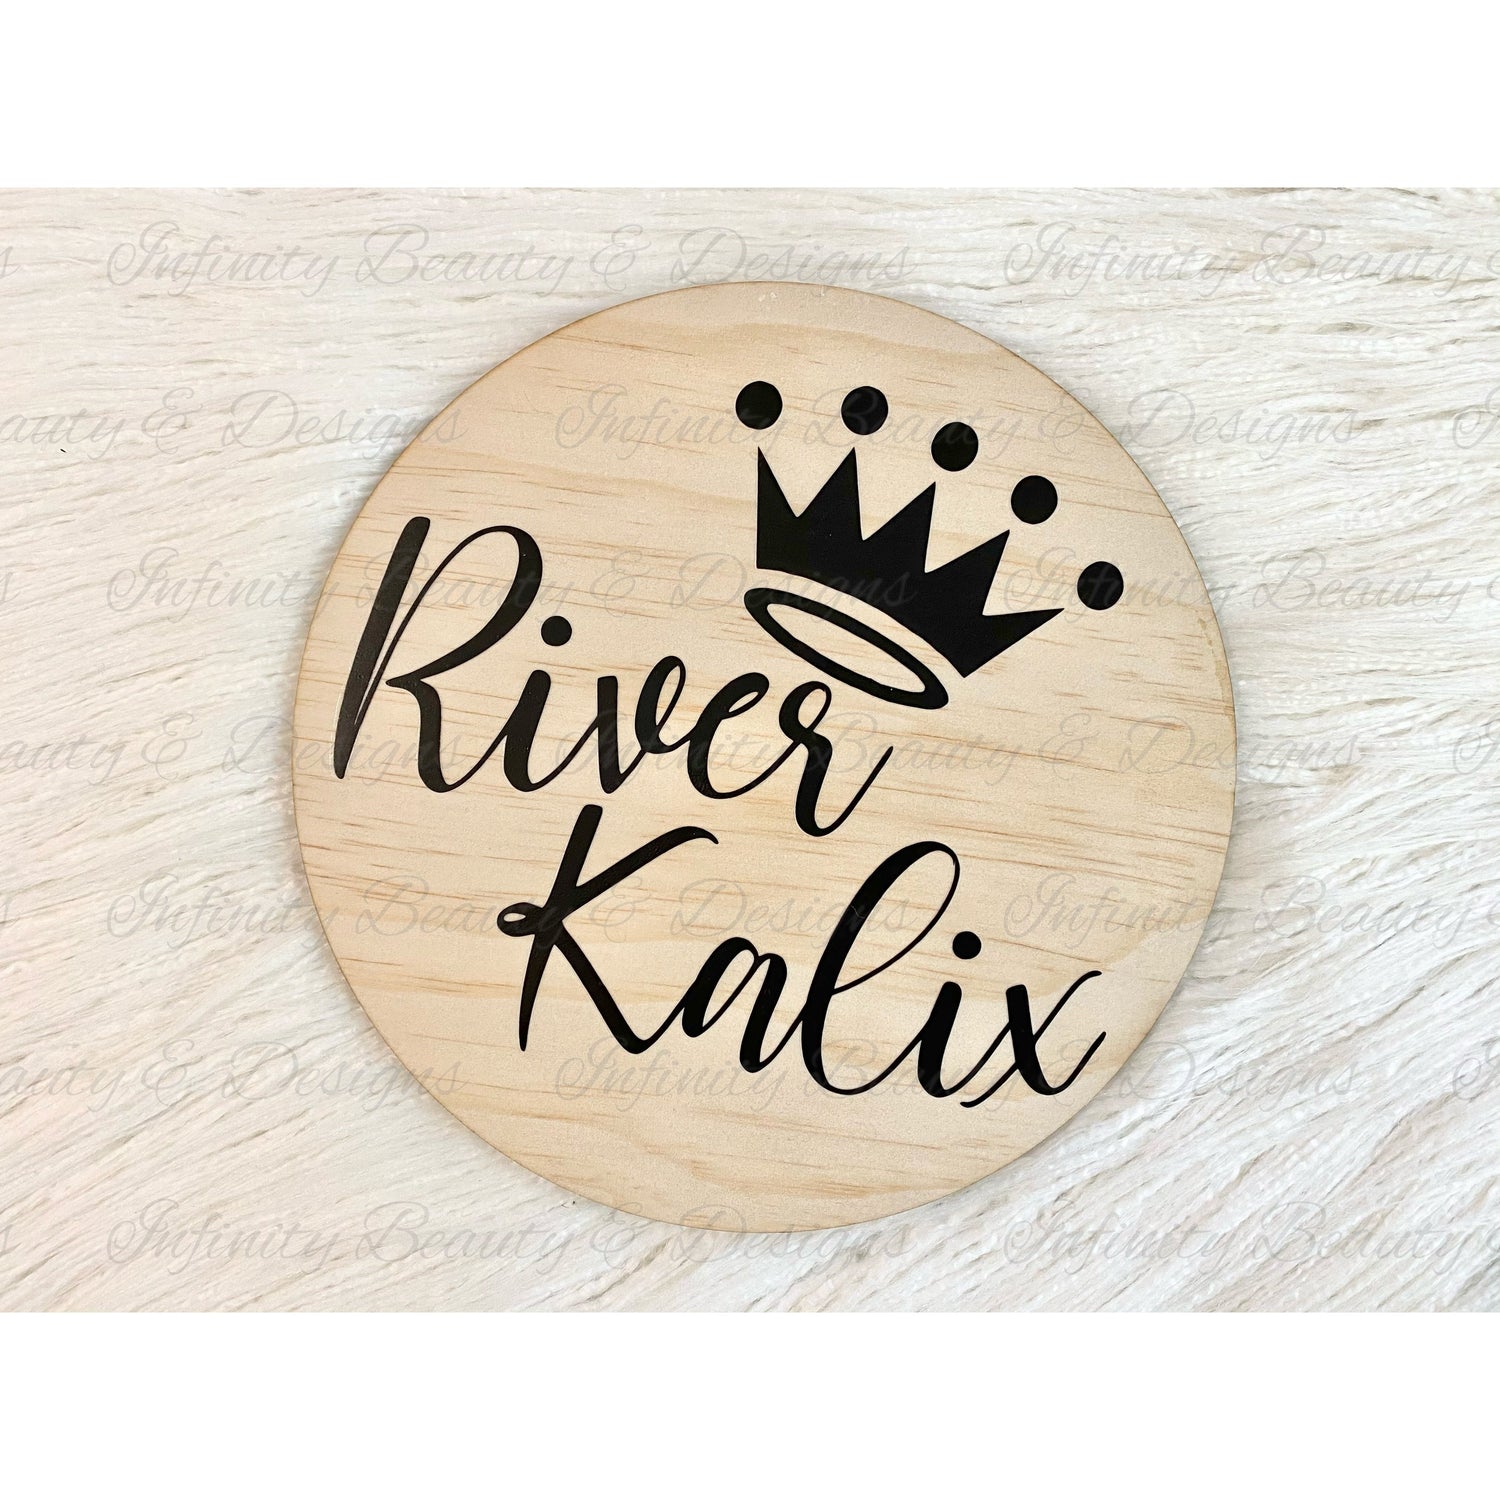 Name Plaque-Infinity Beauty & Designs